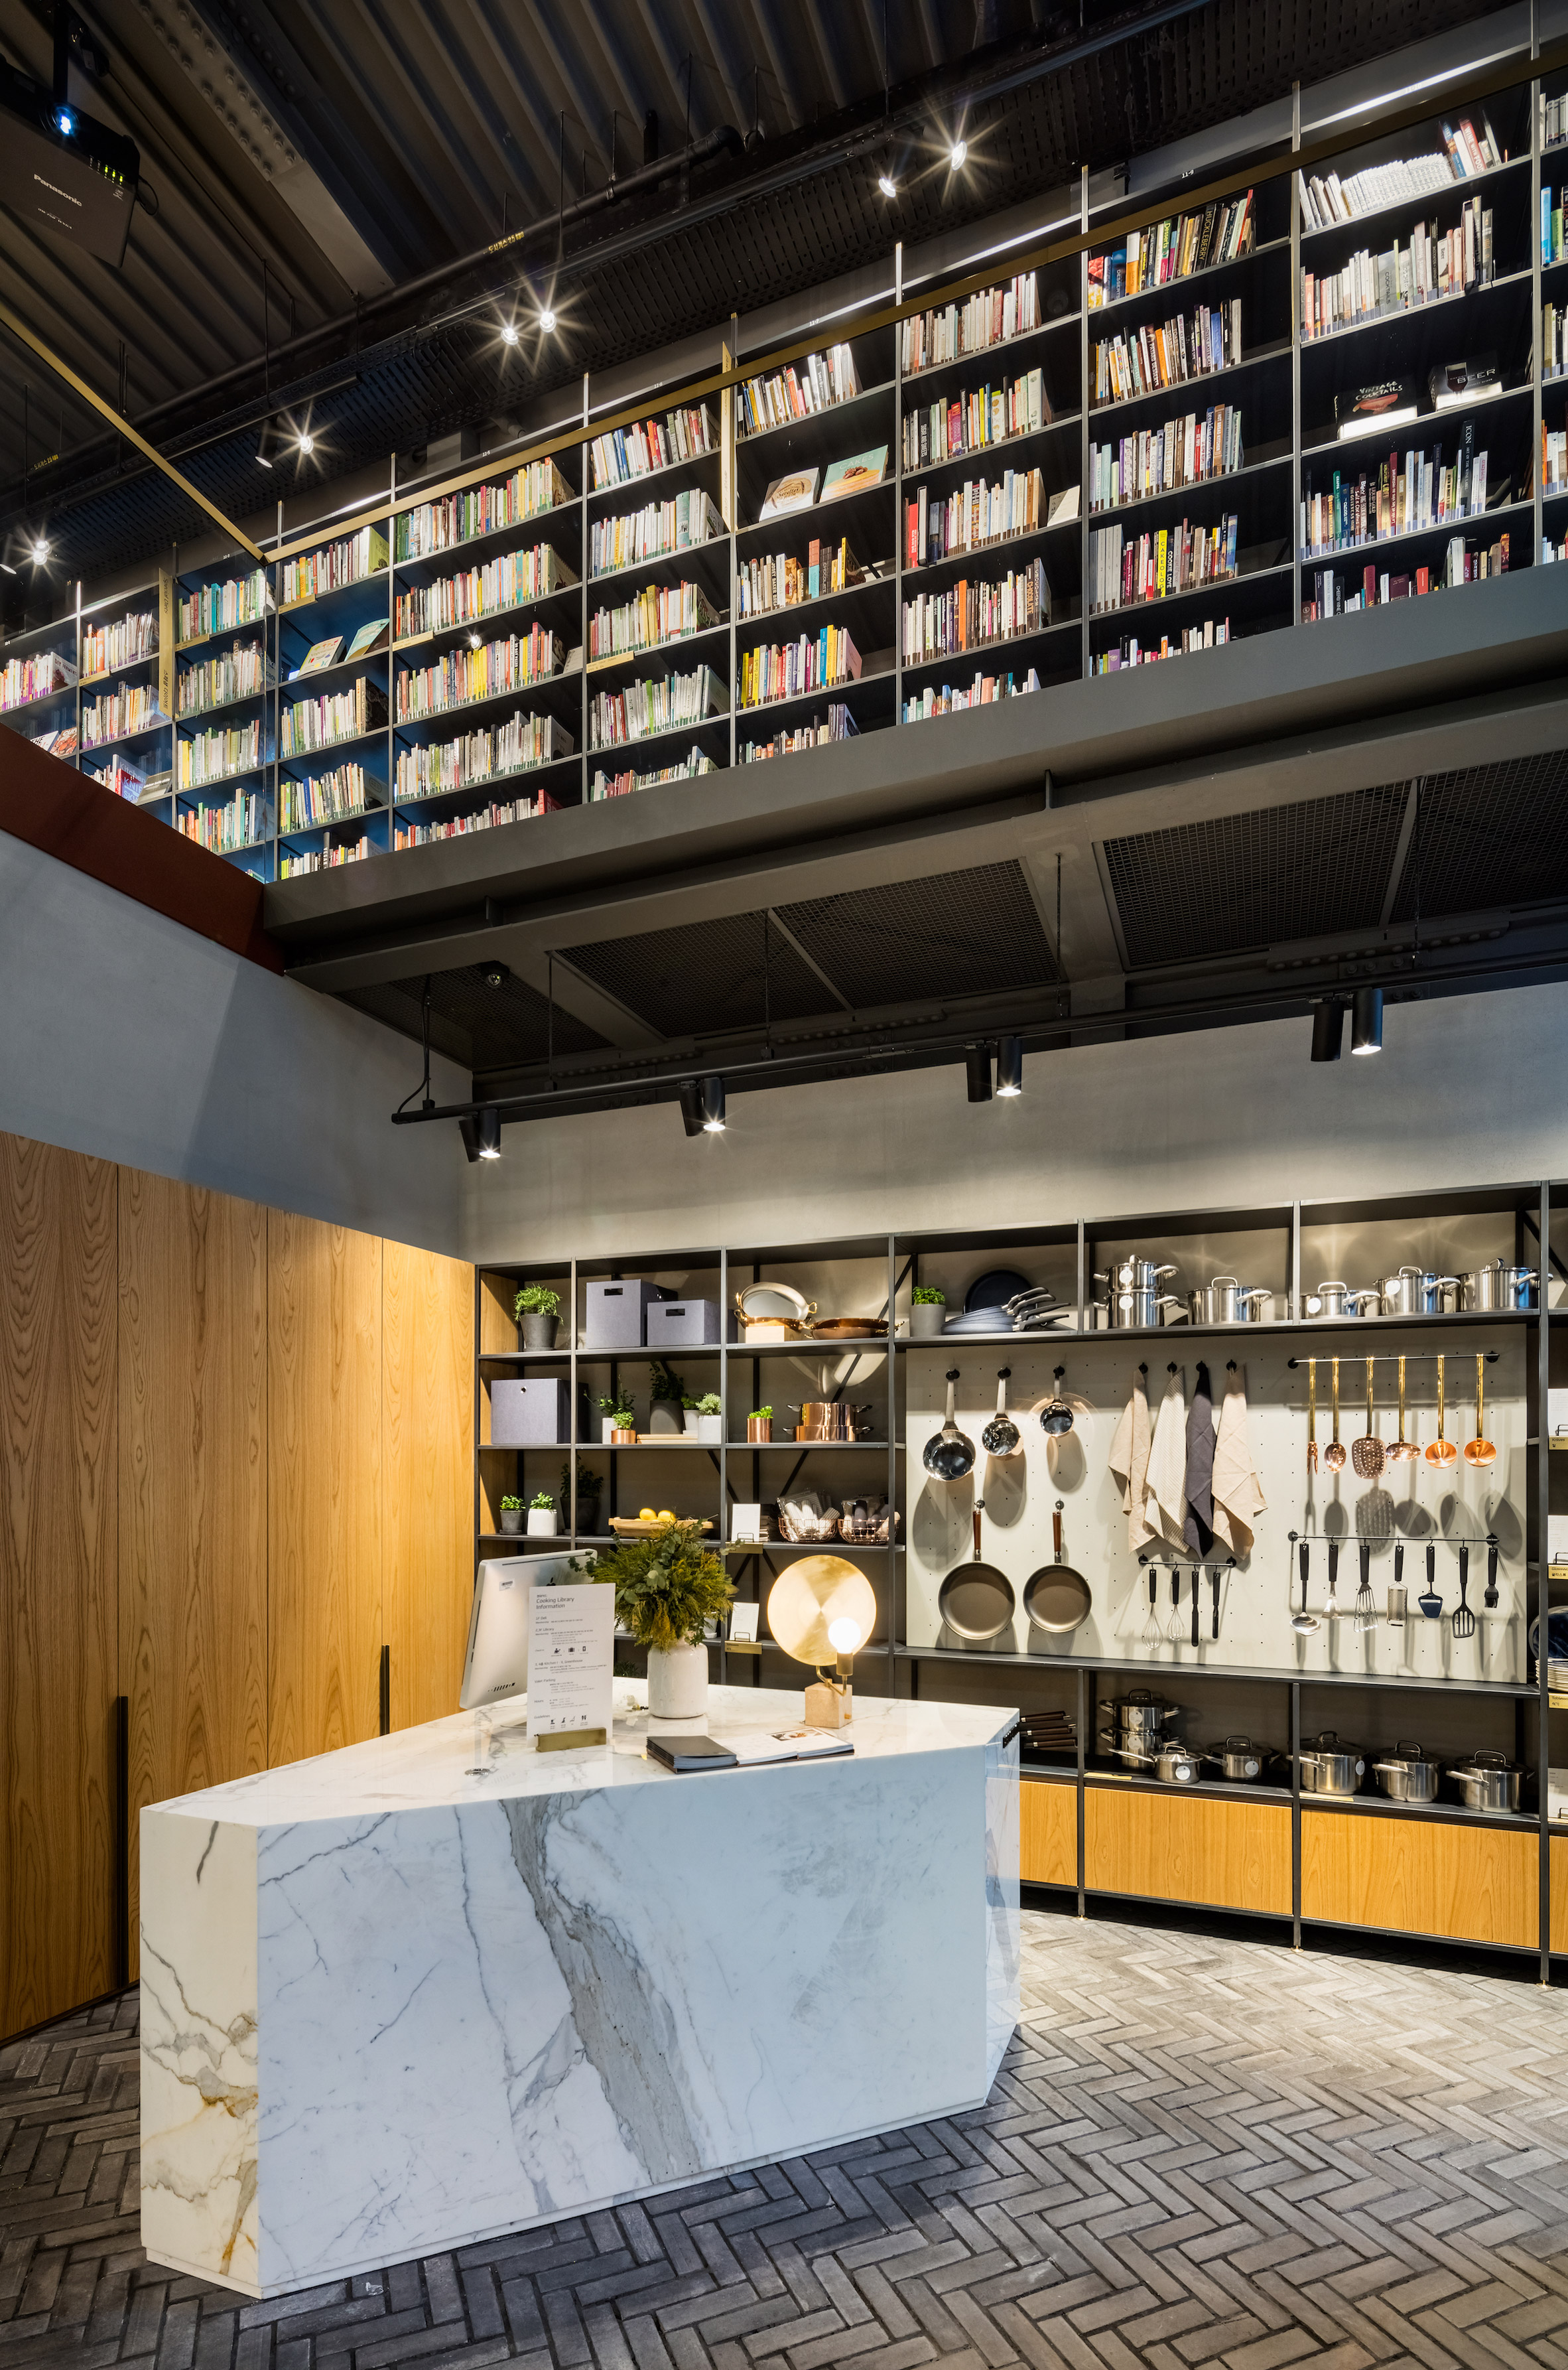 Blacksheep Bases Experiential Cooking Library In Seoul On